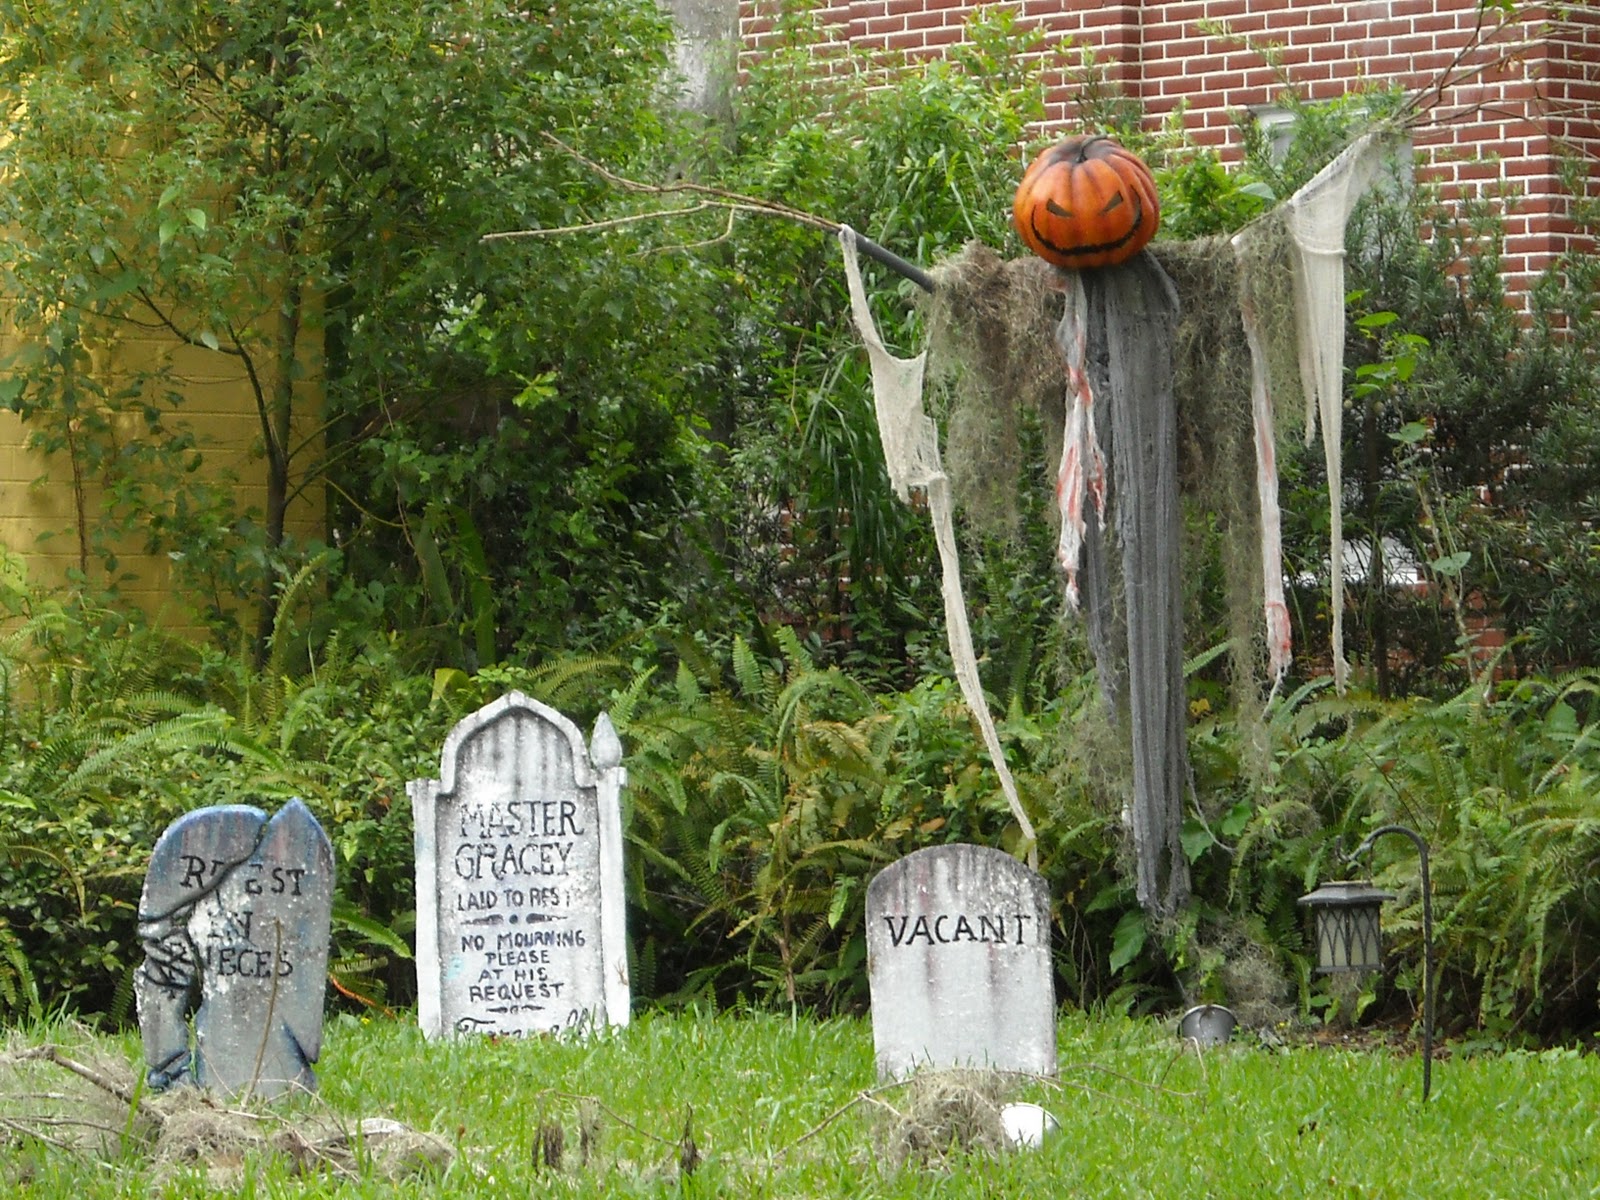 My Daily Swoon: Spooktacular Halloween Yards of Orlando